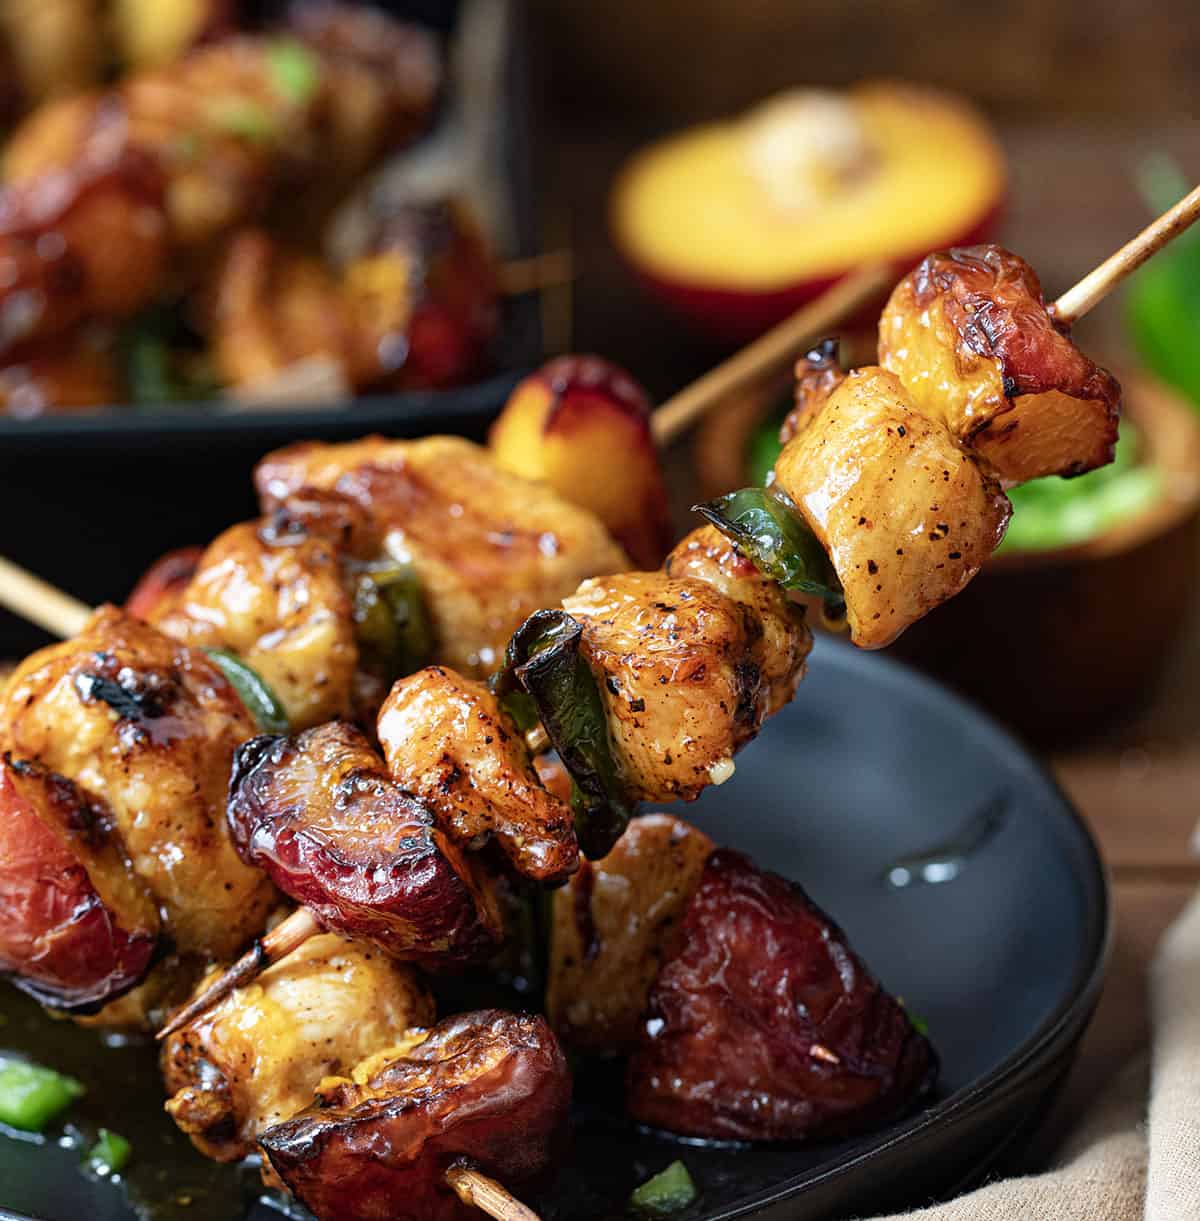 Holding up one Jalapeno Peach Chicken Skewers in front of others on a black plate on a wooden table.